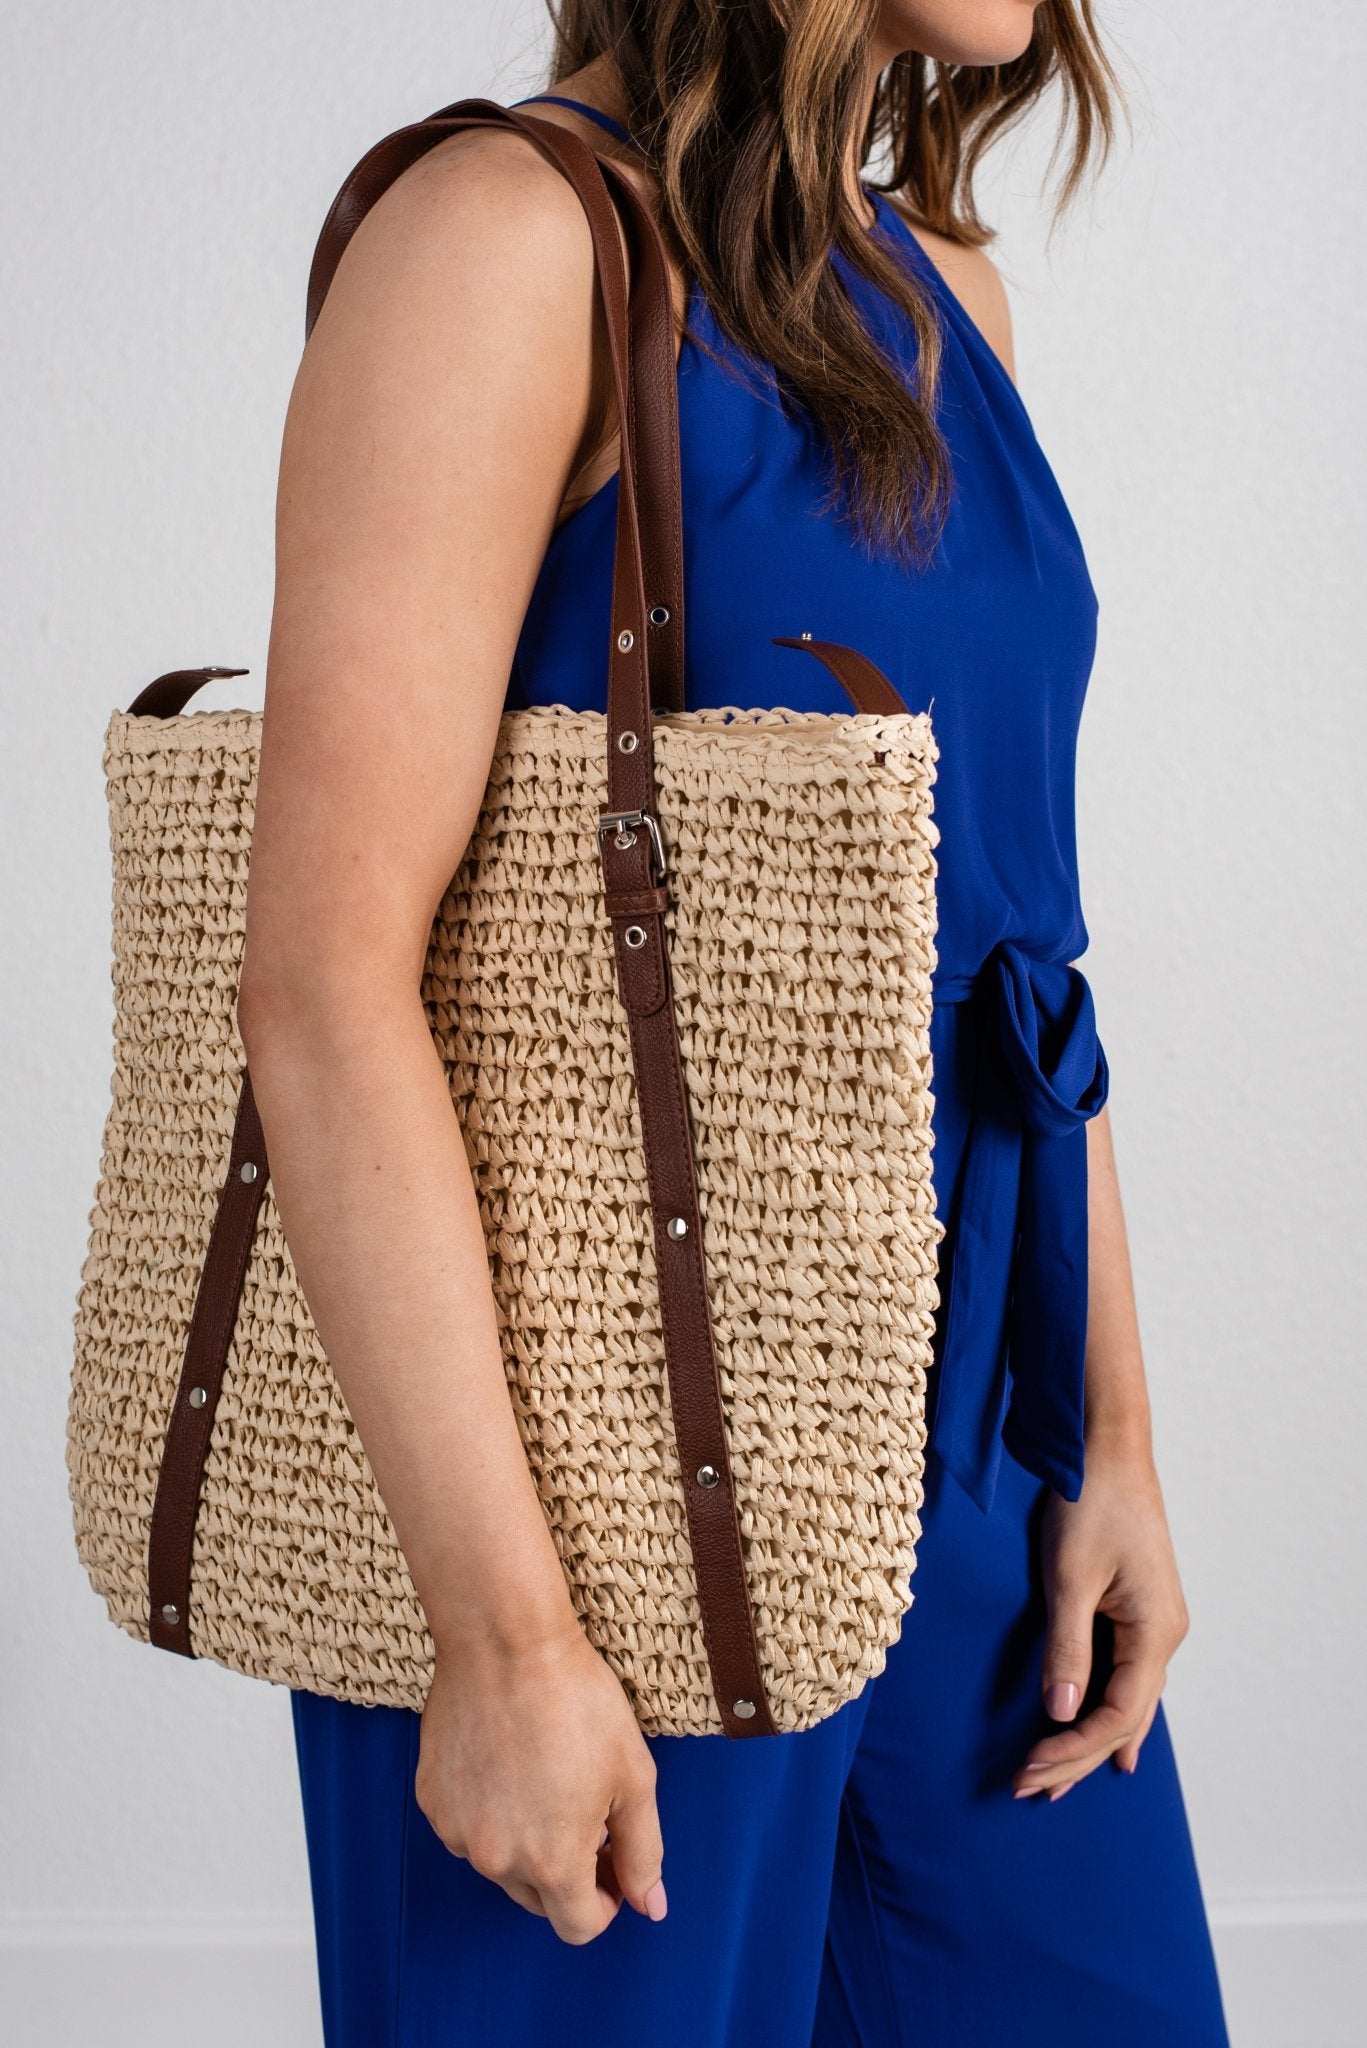 Straw tote bag - Trendy Bags at Lush Fashion Lounge Boutique in Oklahoma City